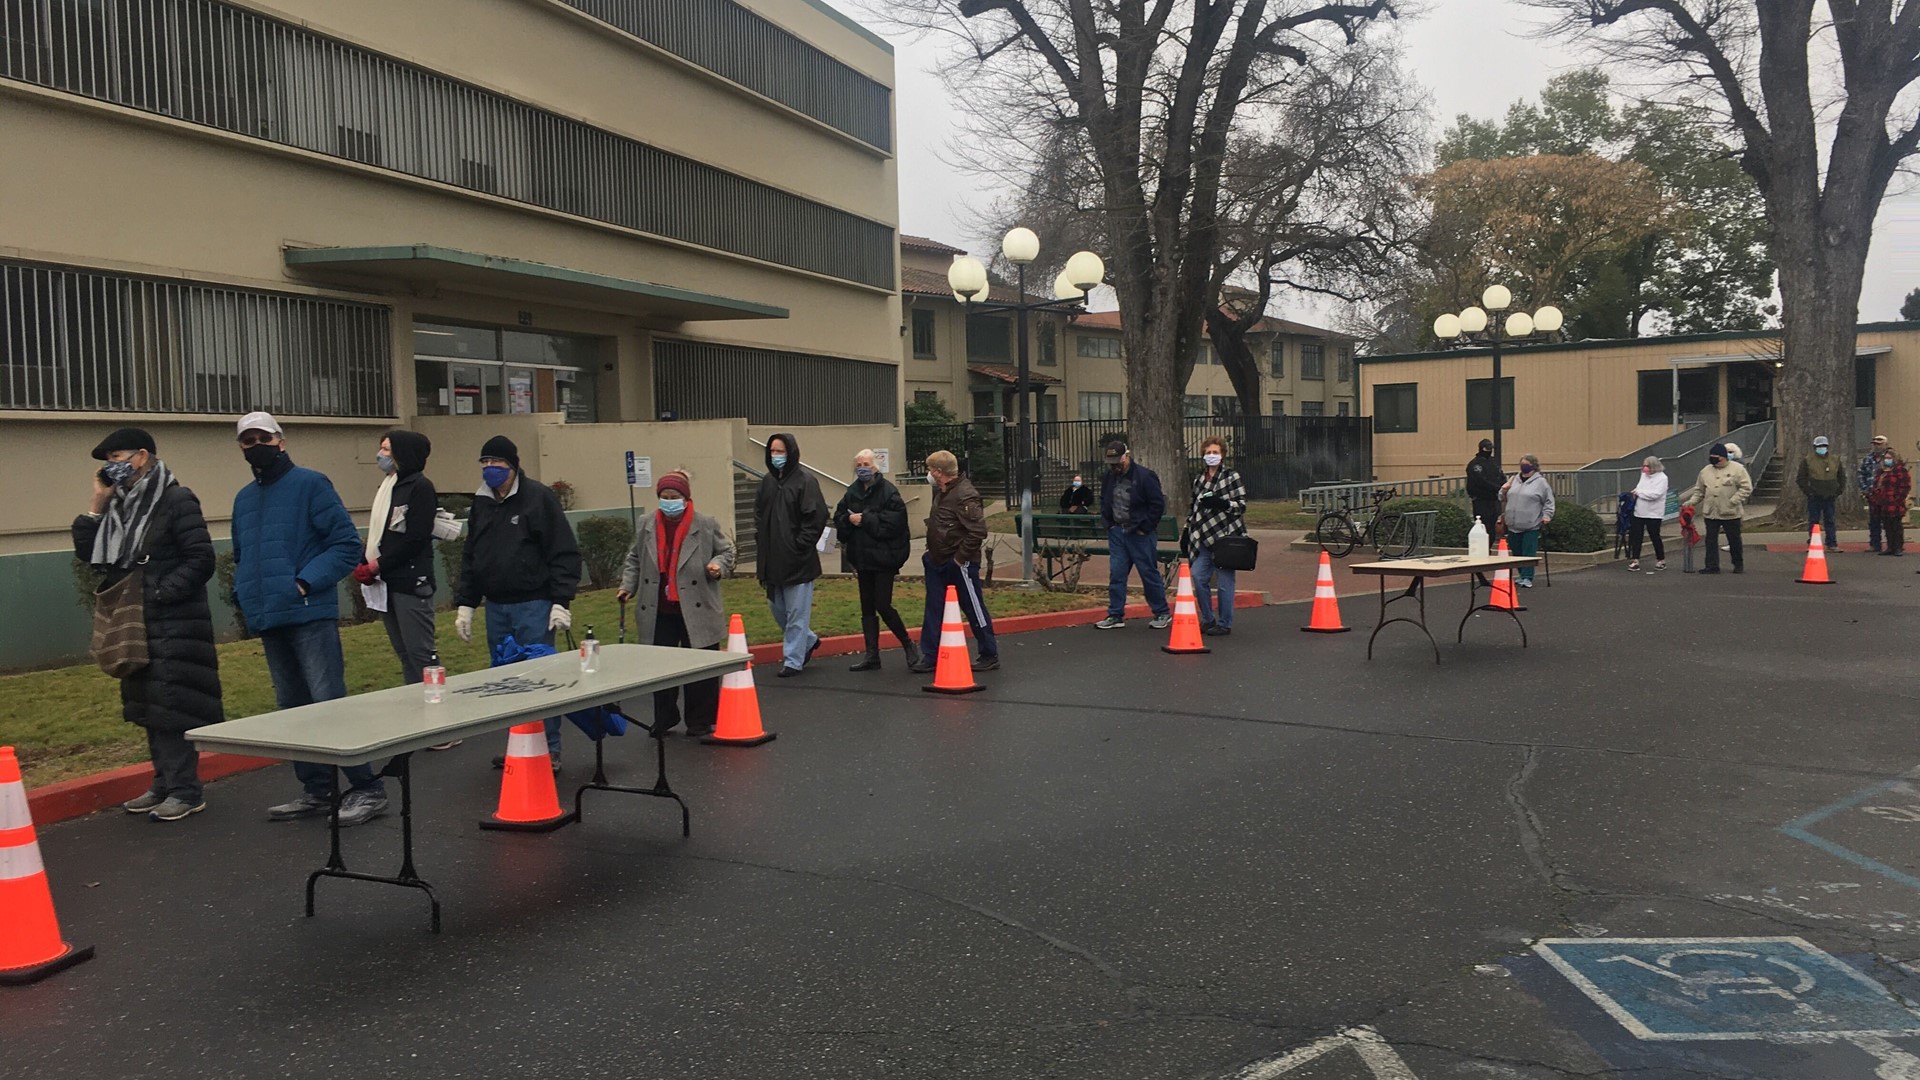 On the first day people over the age of 65 could get vaccinated, a Modesto clinic saw long lines as people waited to get their shots.